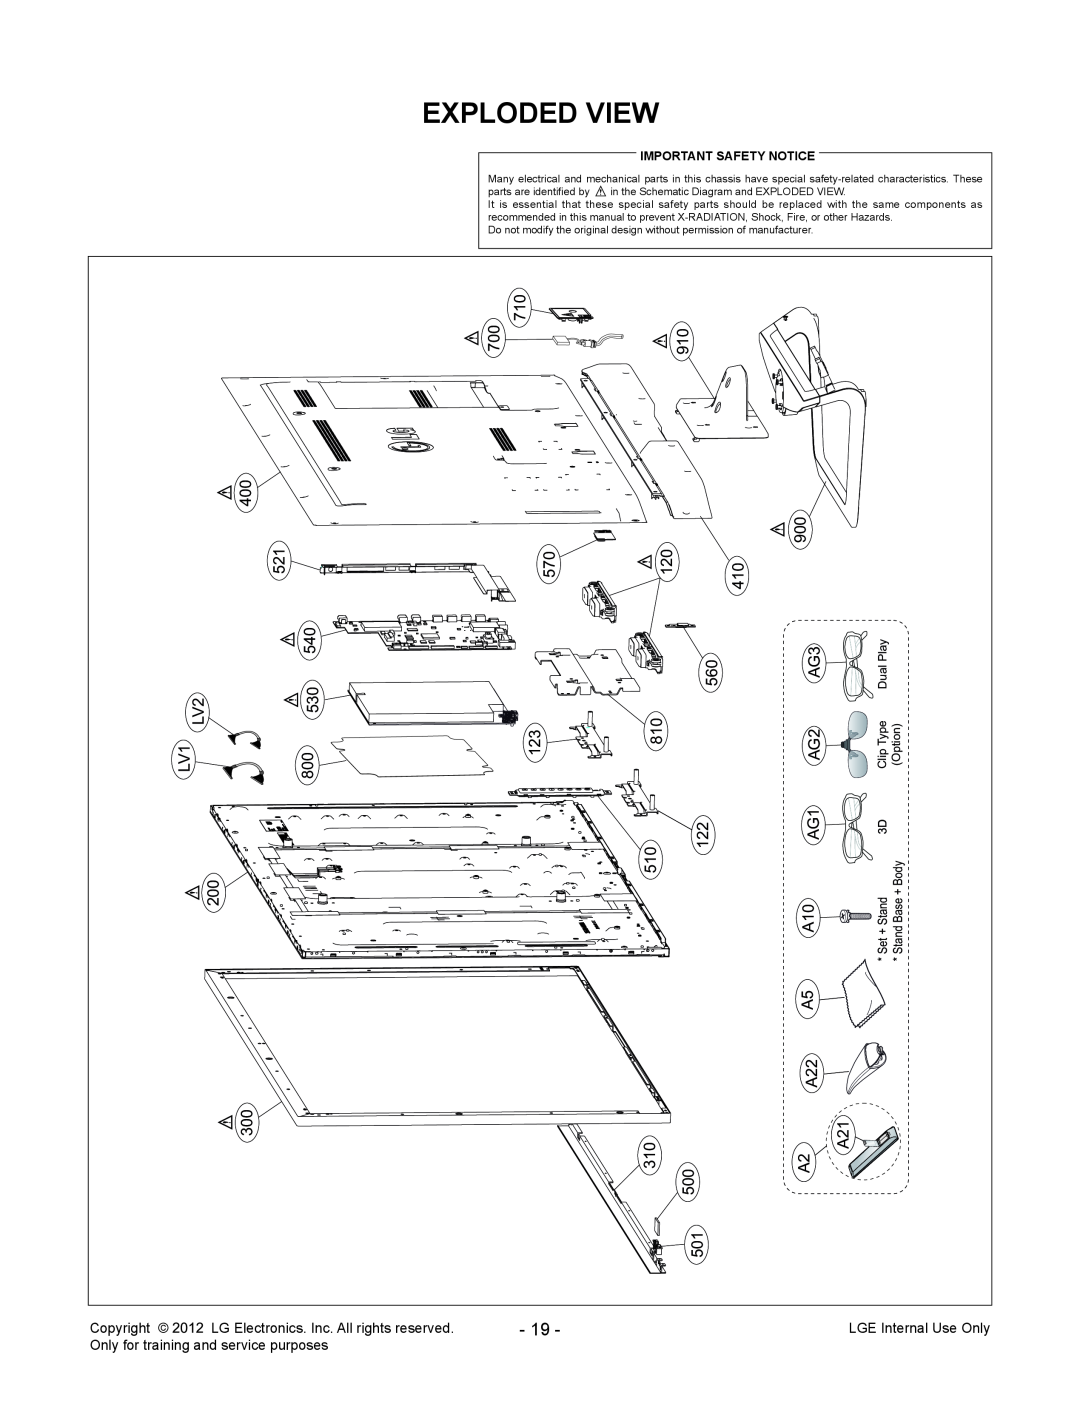 LG Electronics 47LM761S/761T-ZA, MFL67360901, 47LM765S/765T-ZD, 47LM760S/760T-ZB service manual Exploded View 